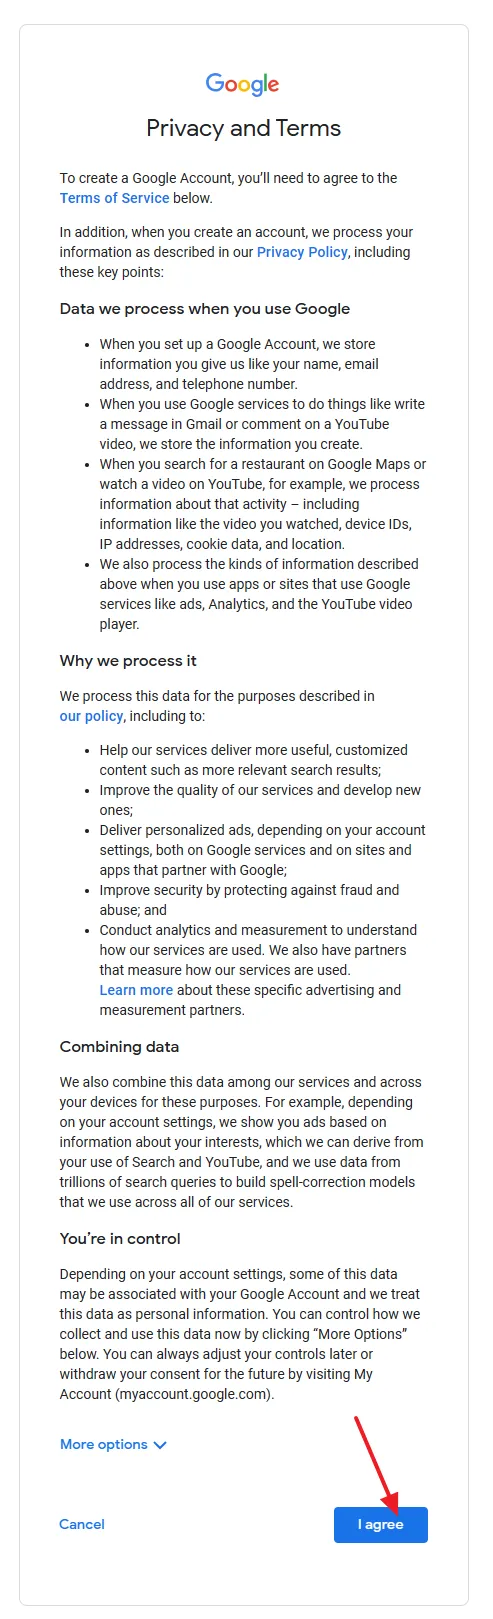 Click on the I agree button to accept the Google Privacy and Terms.